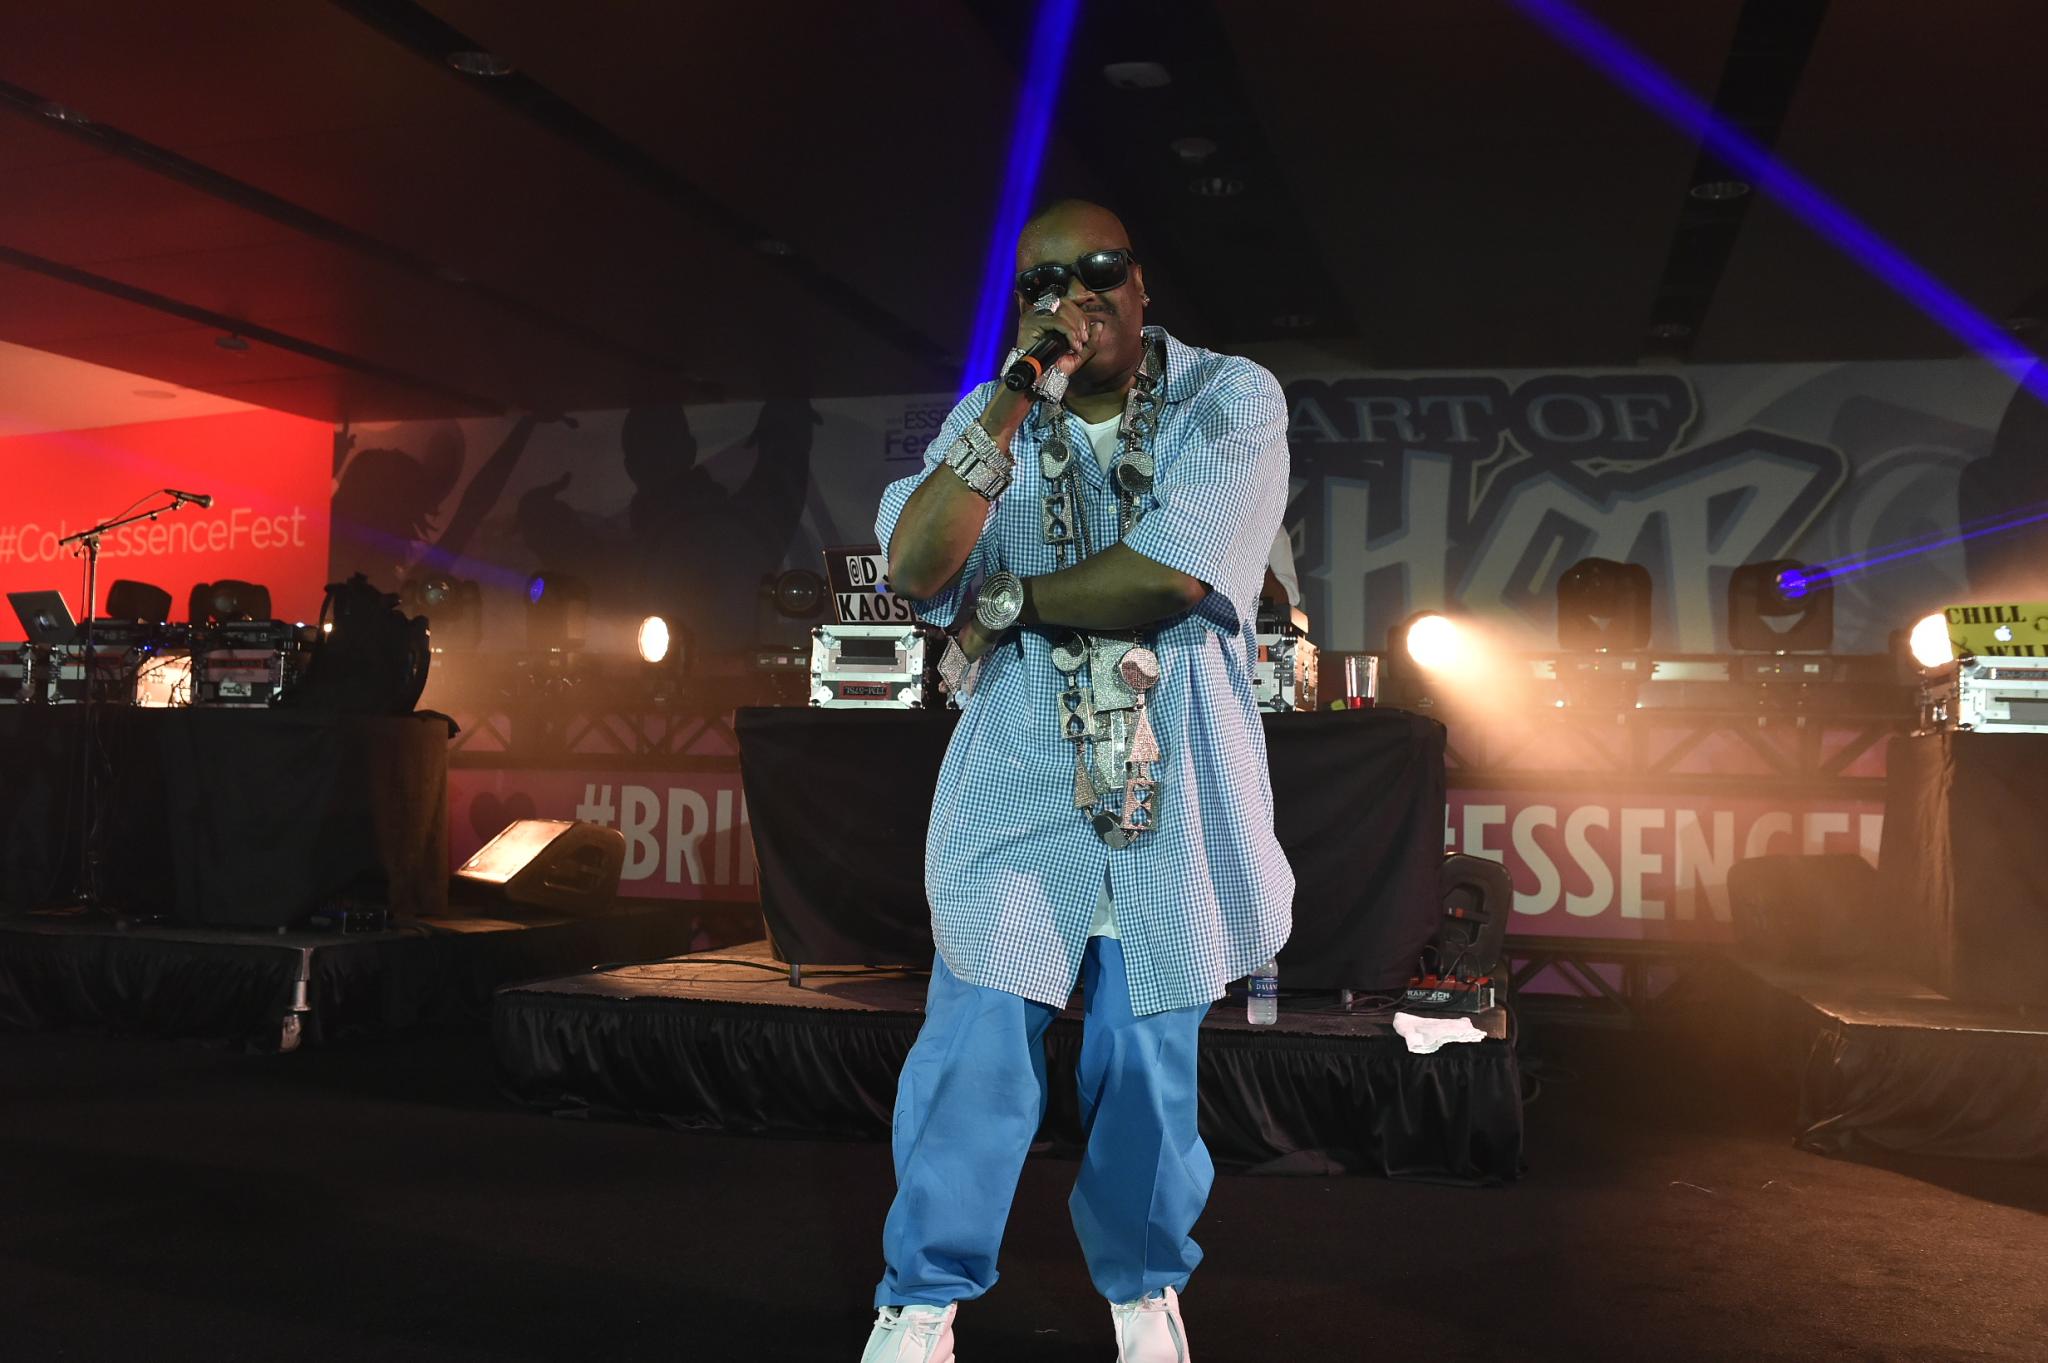 4 Ways Slick Rick Proves He’s Still The Ruler on Stage